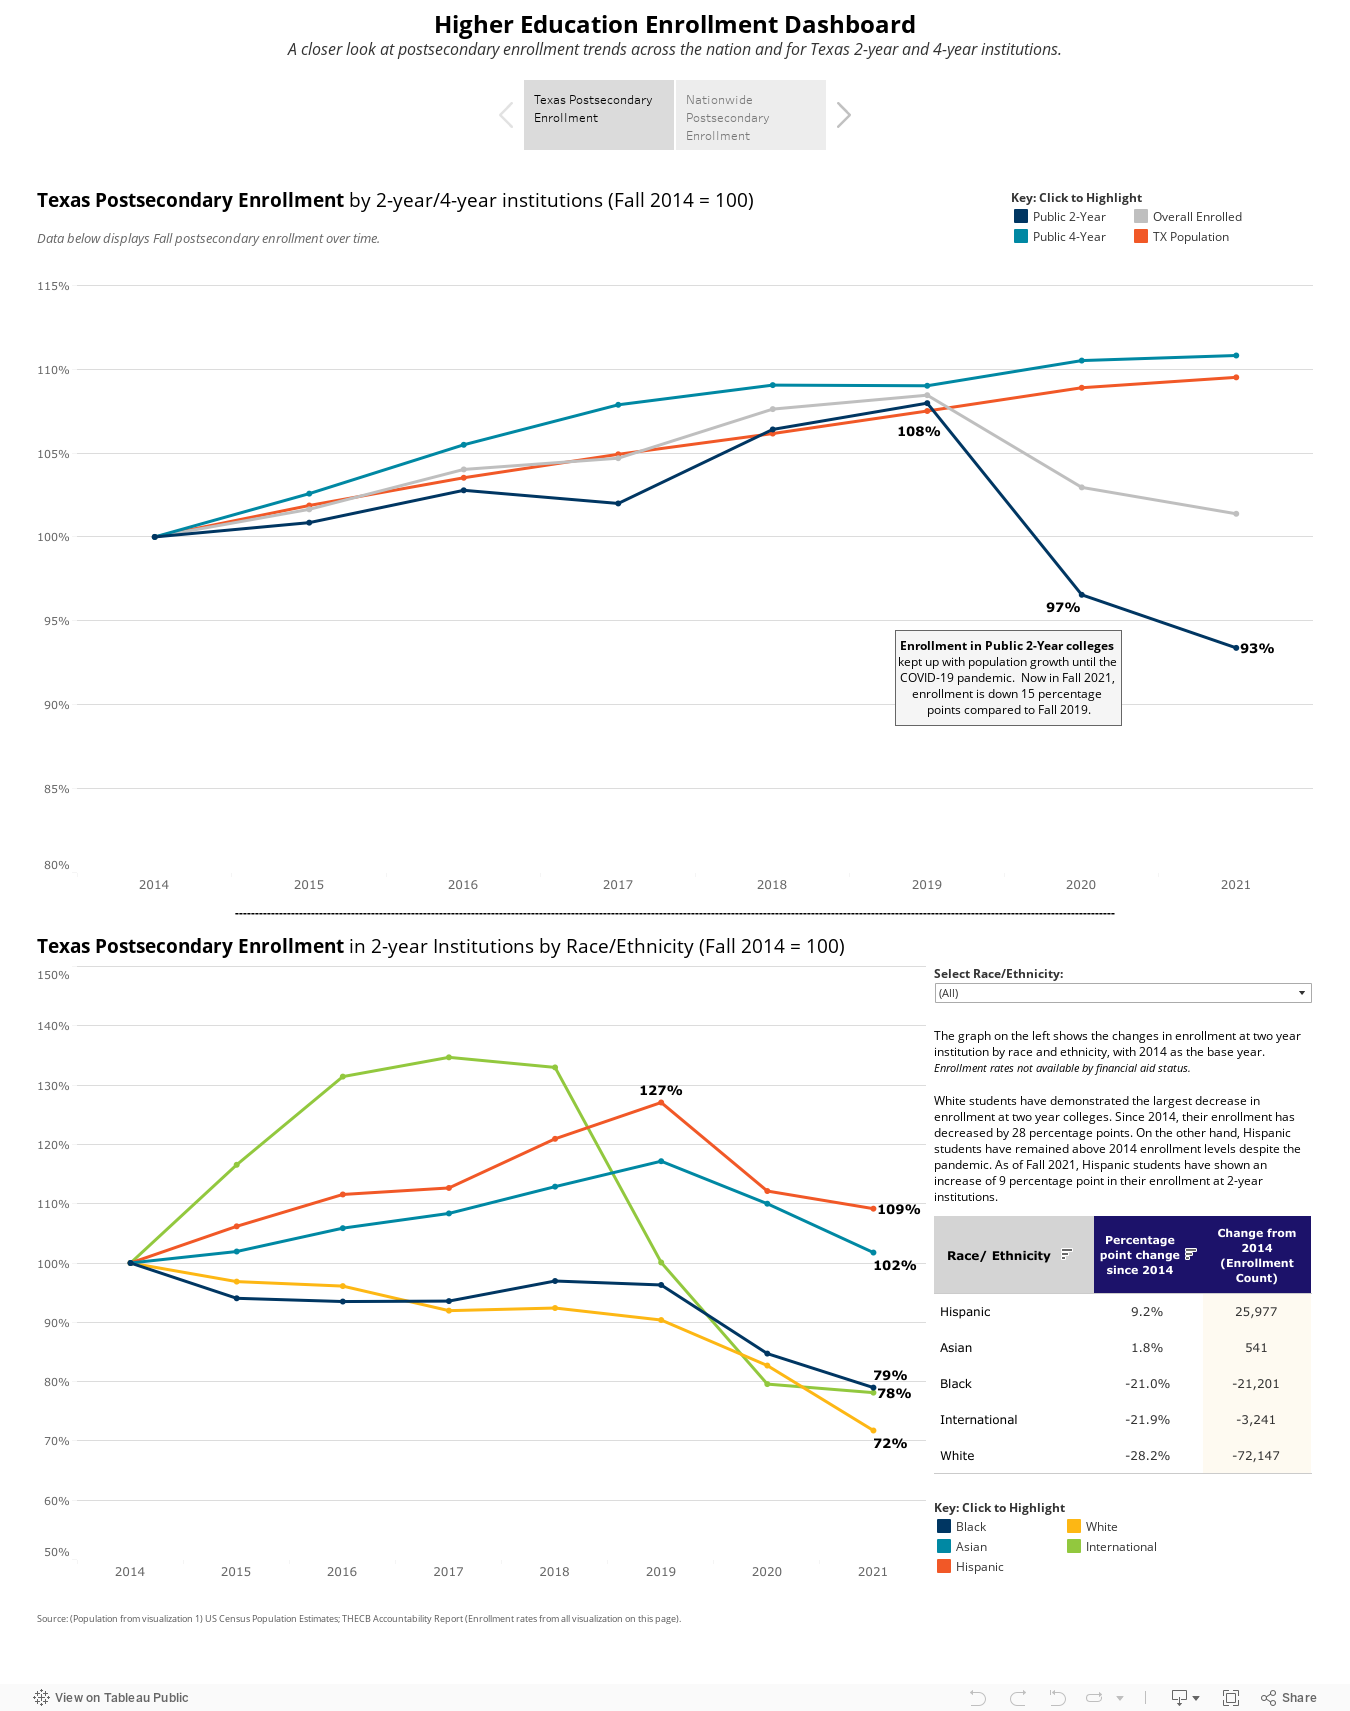 Higher Education Enrollement DashboardA closer look at postsecondary enrollment trends across the nation and for Texas 2-year and 4-year institutions. 